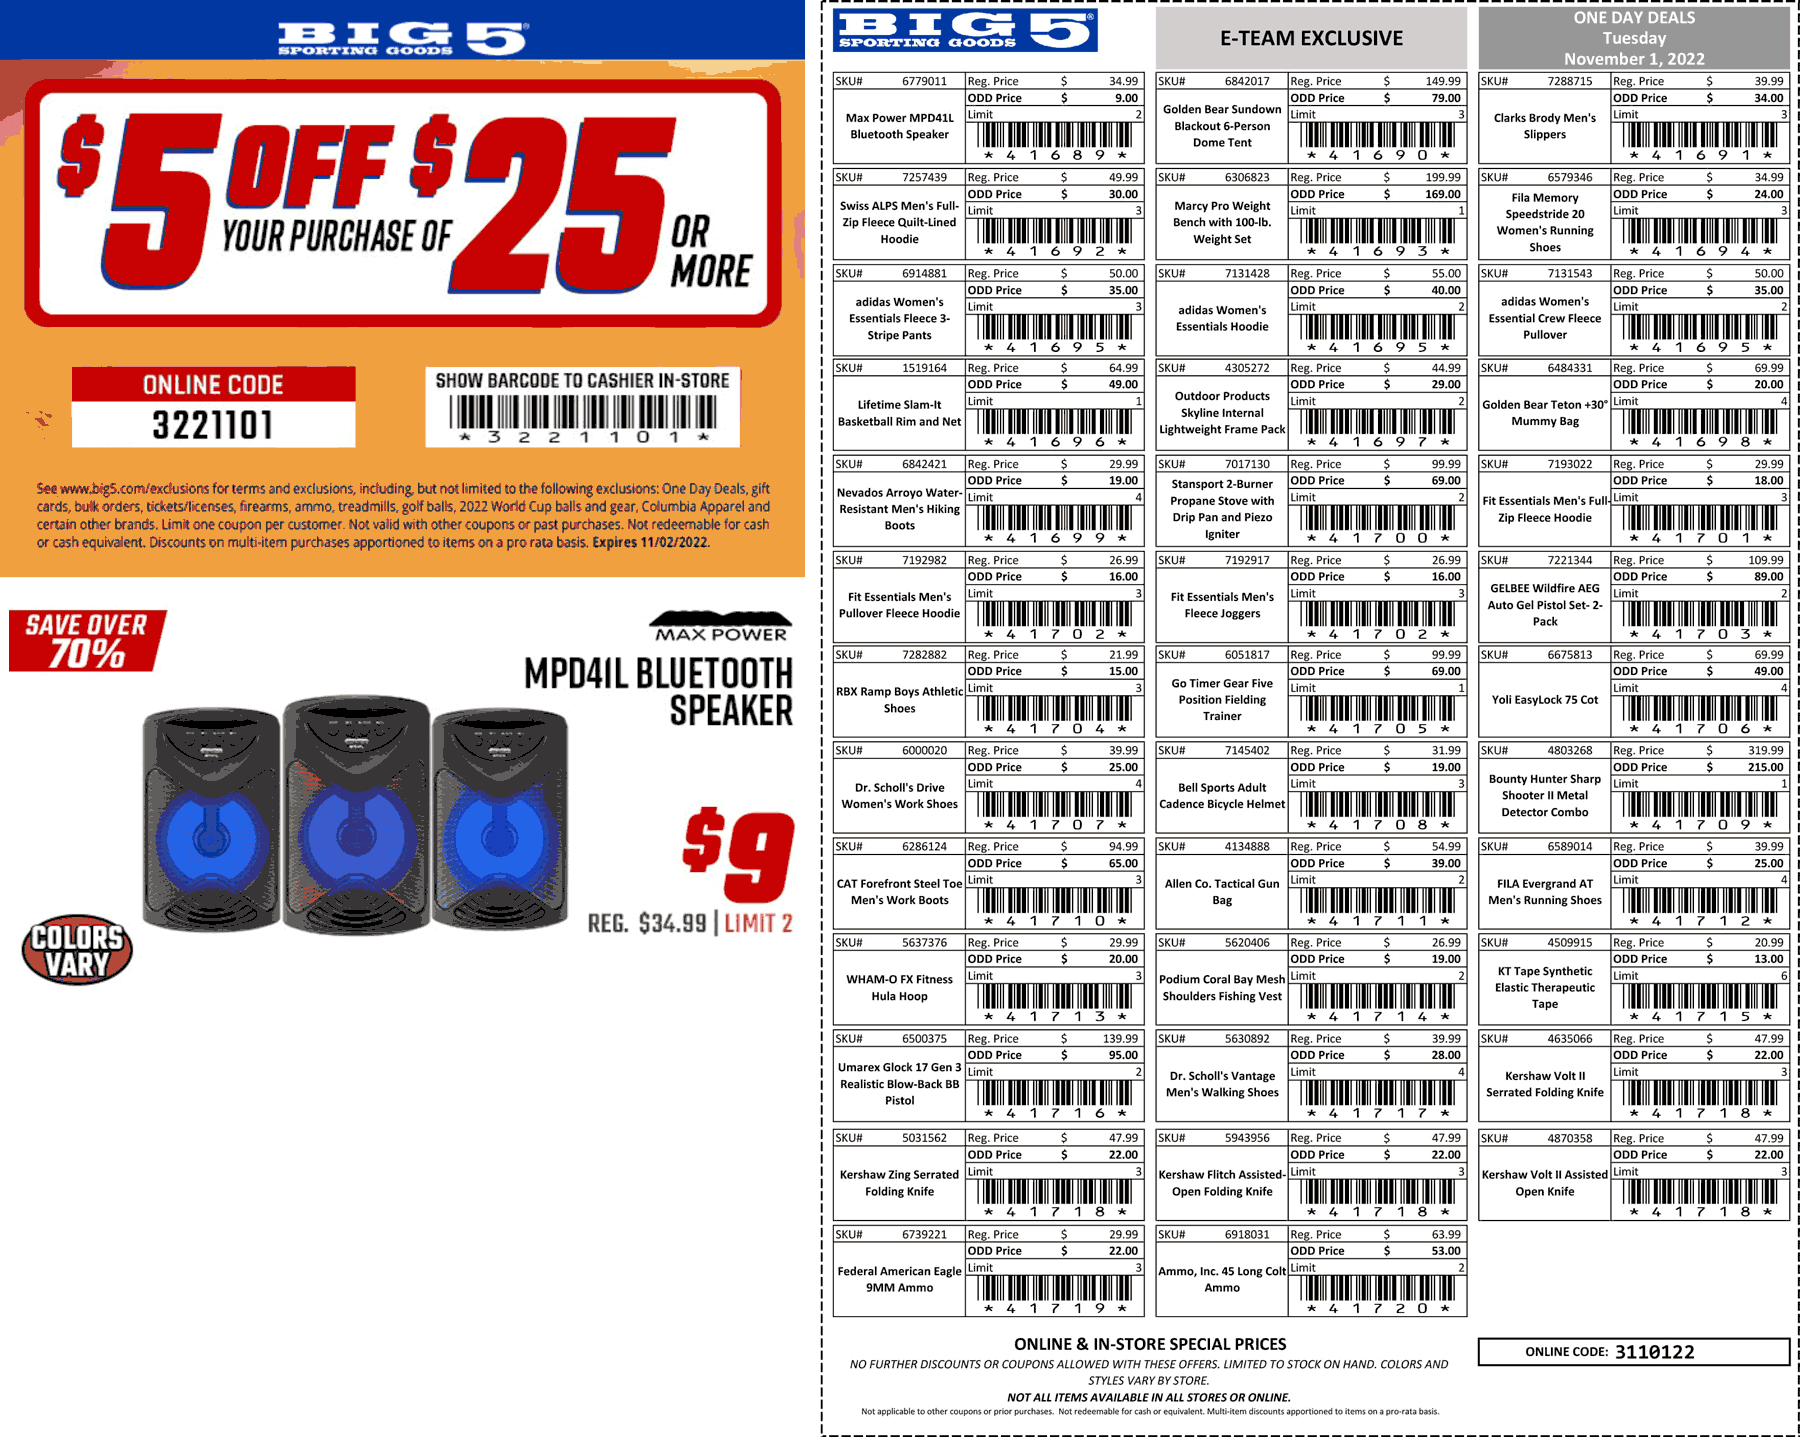 Big 5 stores Coupon  $5 off $25 + $9 bluetooth boombox at Big 5 sporting goods, or online via promo code 3221101 #big5 